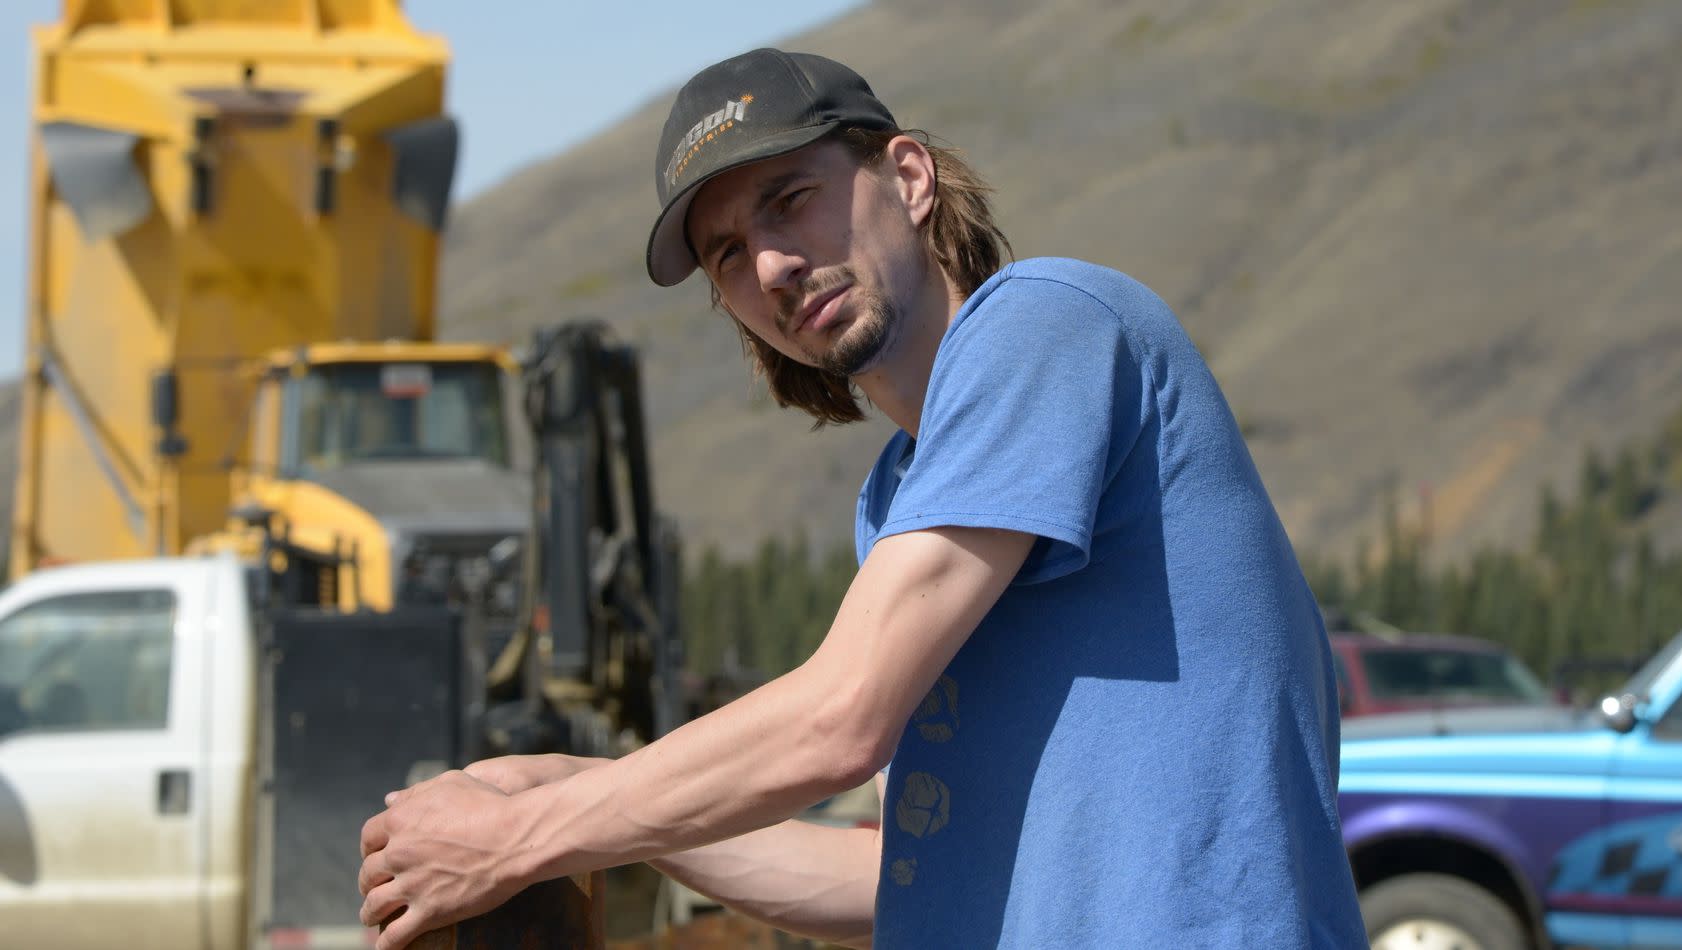 Gold Rush' Parker Schnabel Has One Year to Hit It Big After Water Lice...